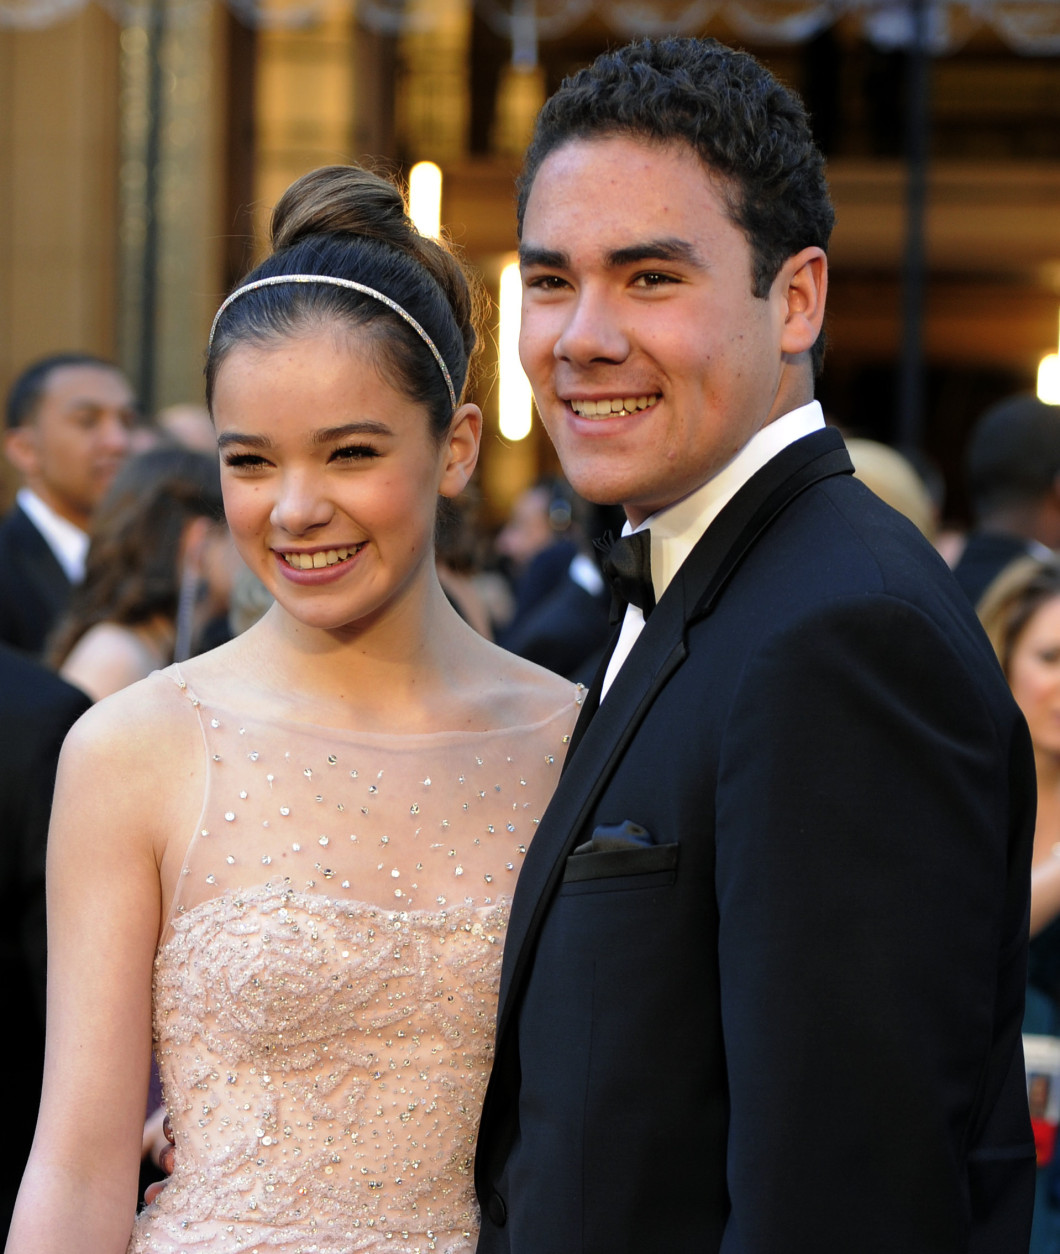 Hailee Steinfeld, left, and her brother Griffin Steinfeld arrive before the 83rd Academy Awards on Sunday, Feb. 27, 2011, in the Hollywood section of Los Angeles. (AP Photo/Chris Pizzello)